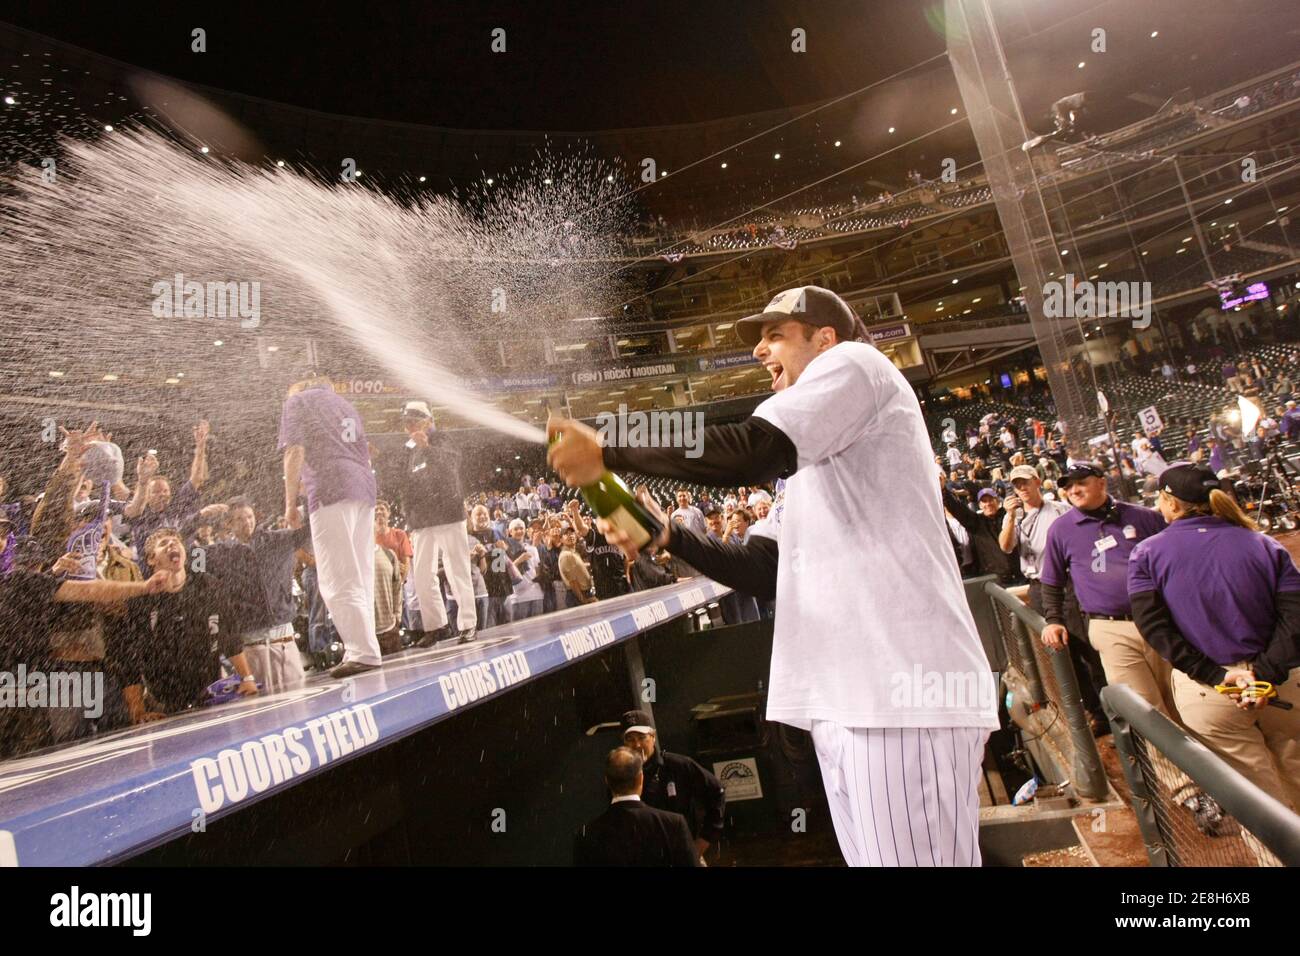 Colorado Rockies player Matt Herges sprays fans with champagne after their win over the San Diego Padres in the 13 innings of their MLB National League Wild Card tiebreaker baseball game in Denver, Colorado, October 1, 2007. The Rockies won the game 9-8 and now advance to the National League Division Series against the Philadelphia Phillies.     REUTERS/Rick Wilking (UNITED STATES - Tags: SPORT BASEBALL) BEST QUALITY AVAILABLE Stock Photo